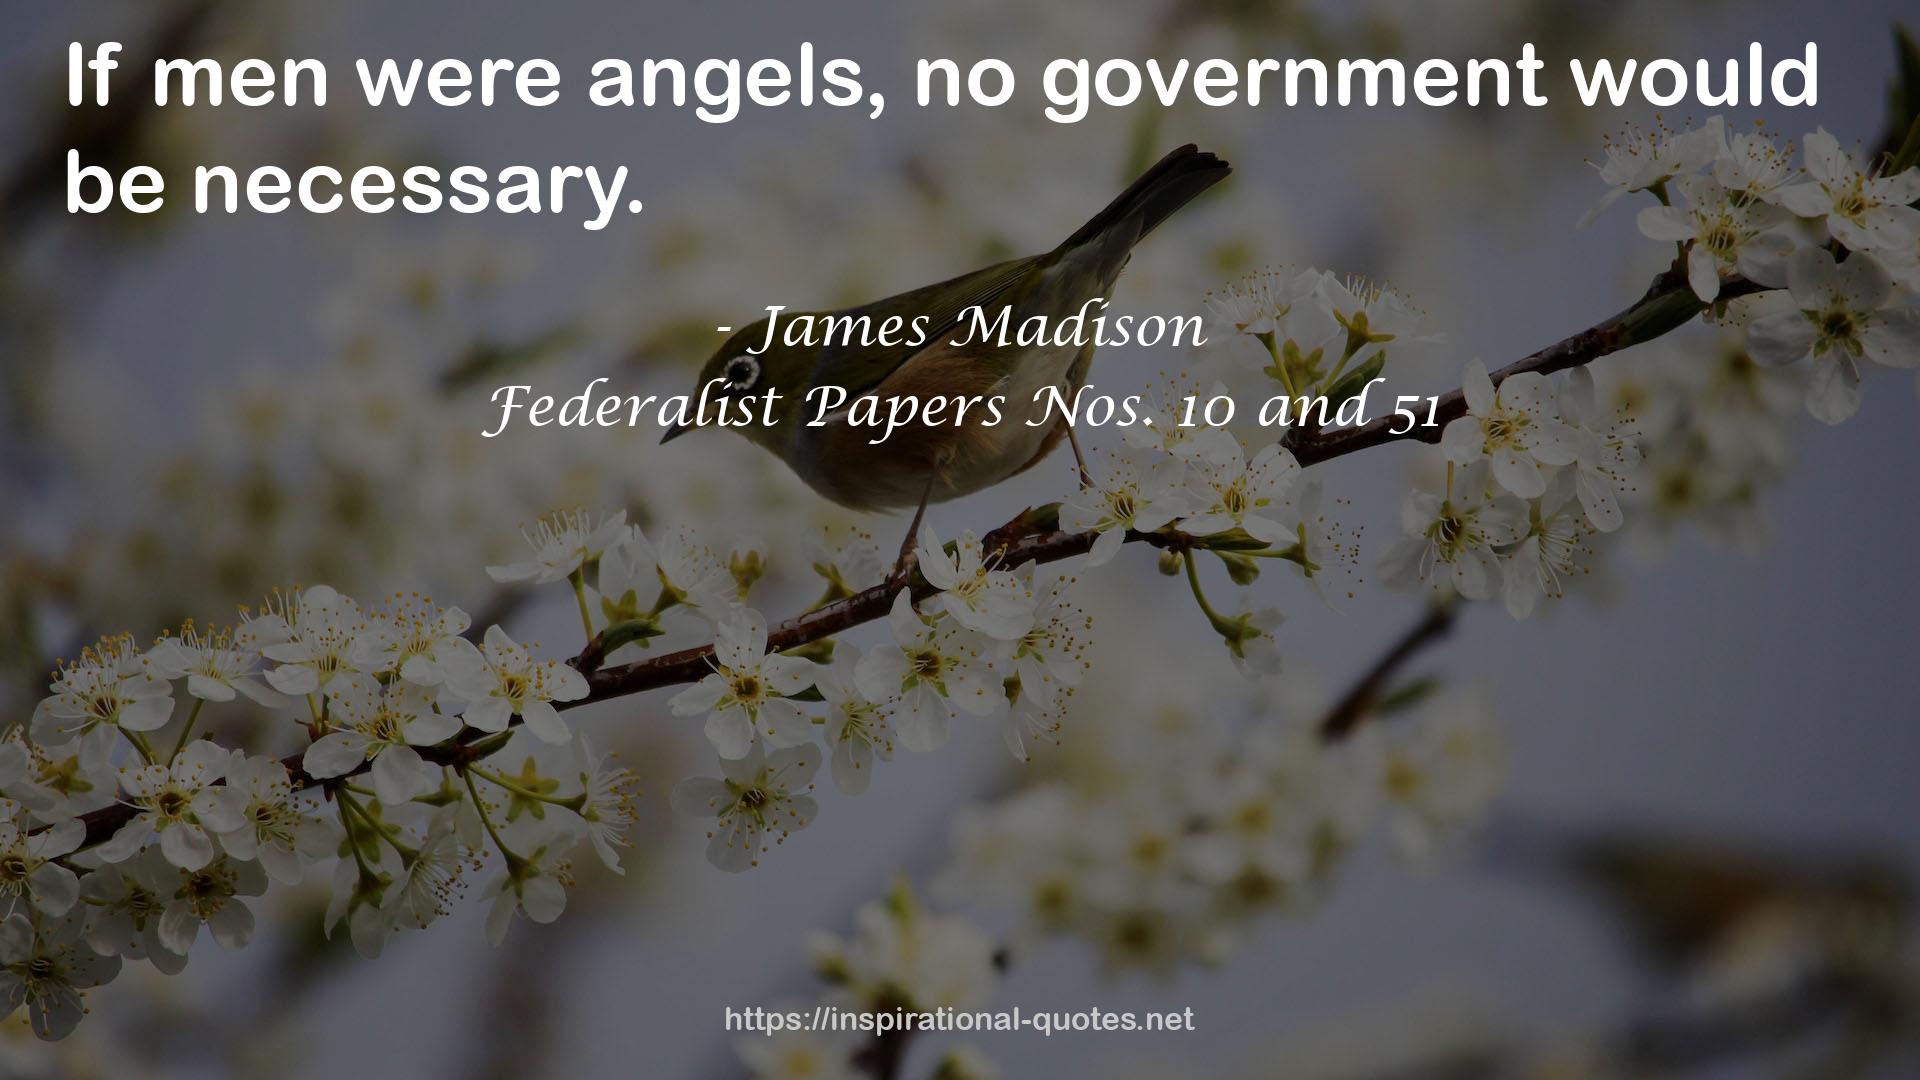 Federalist Papers Nos. 10 and 51 QUOTES